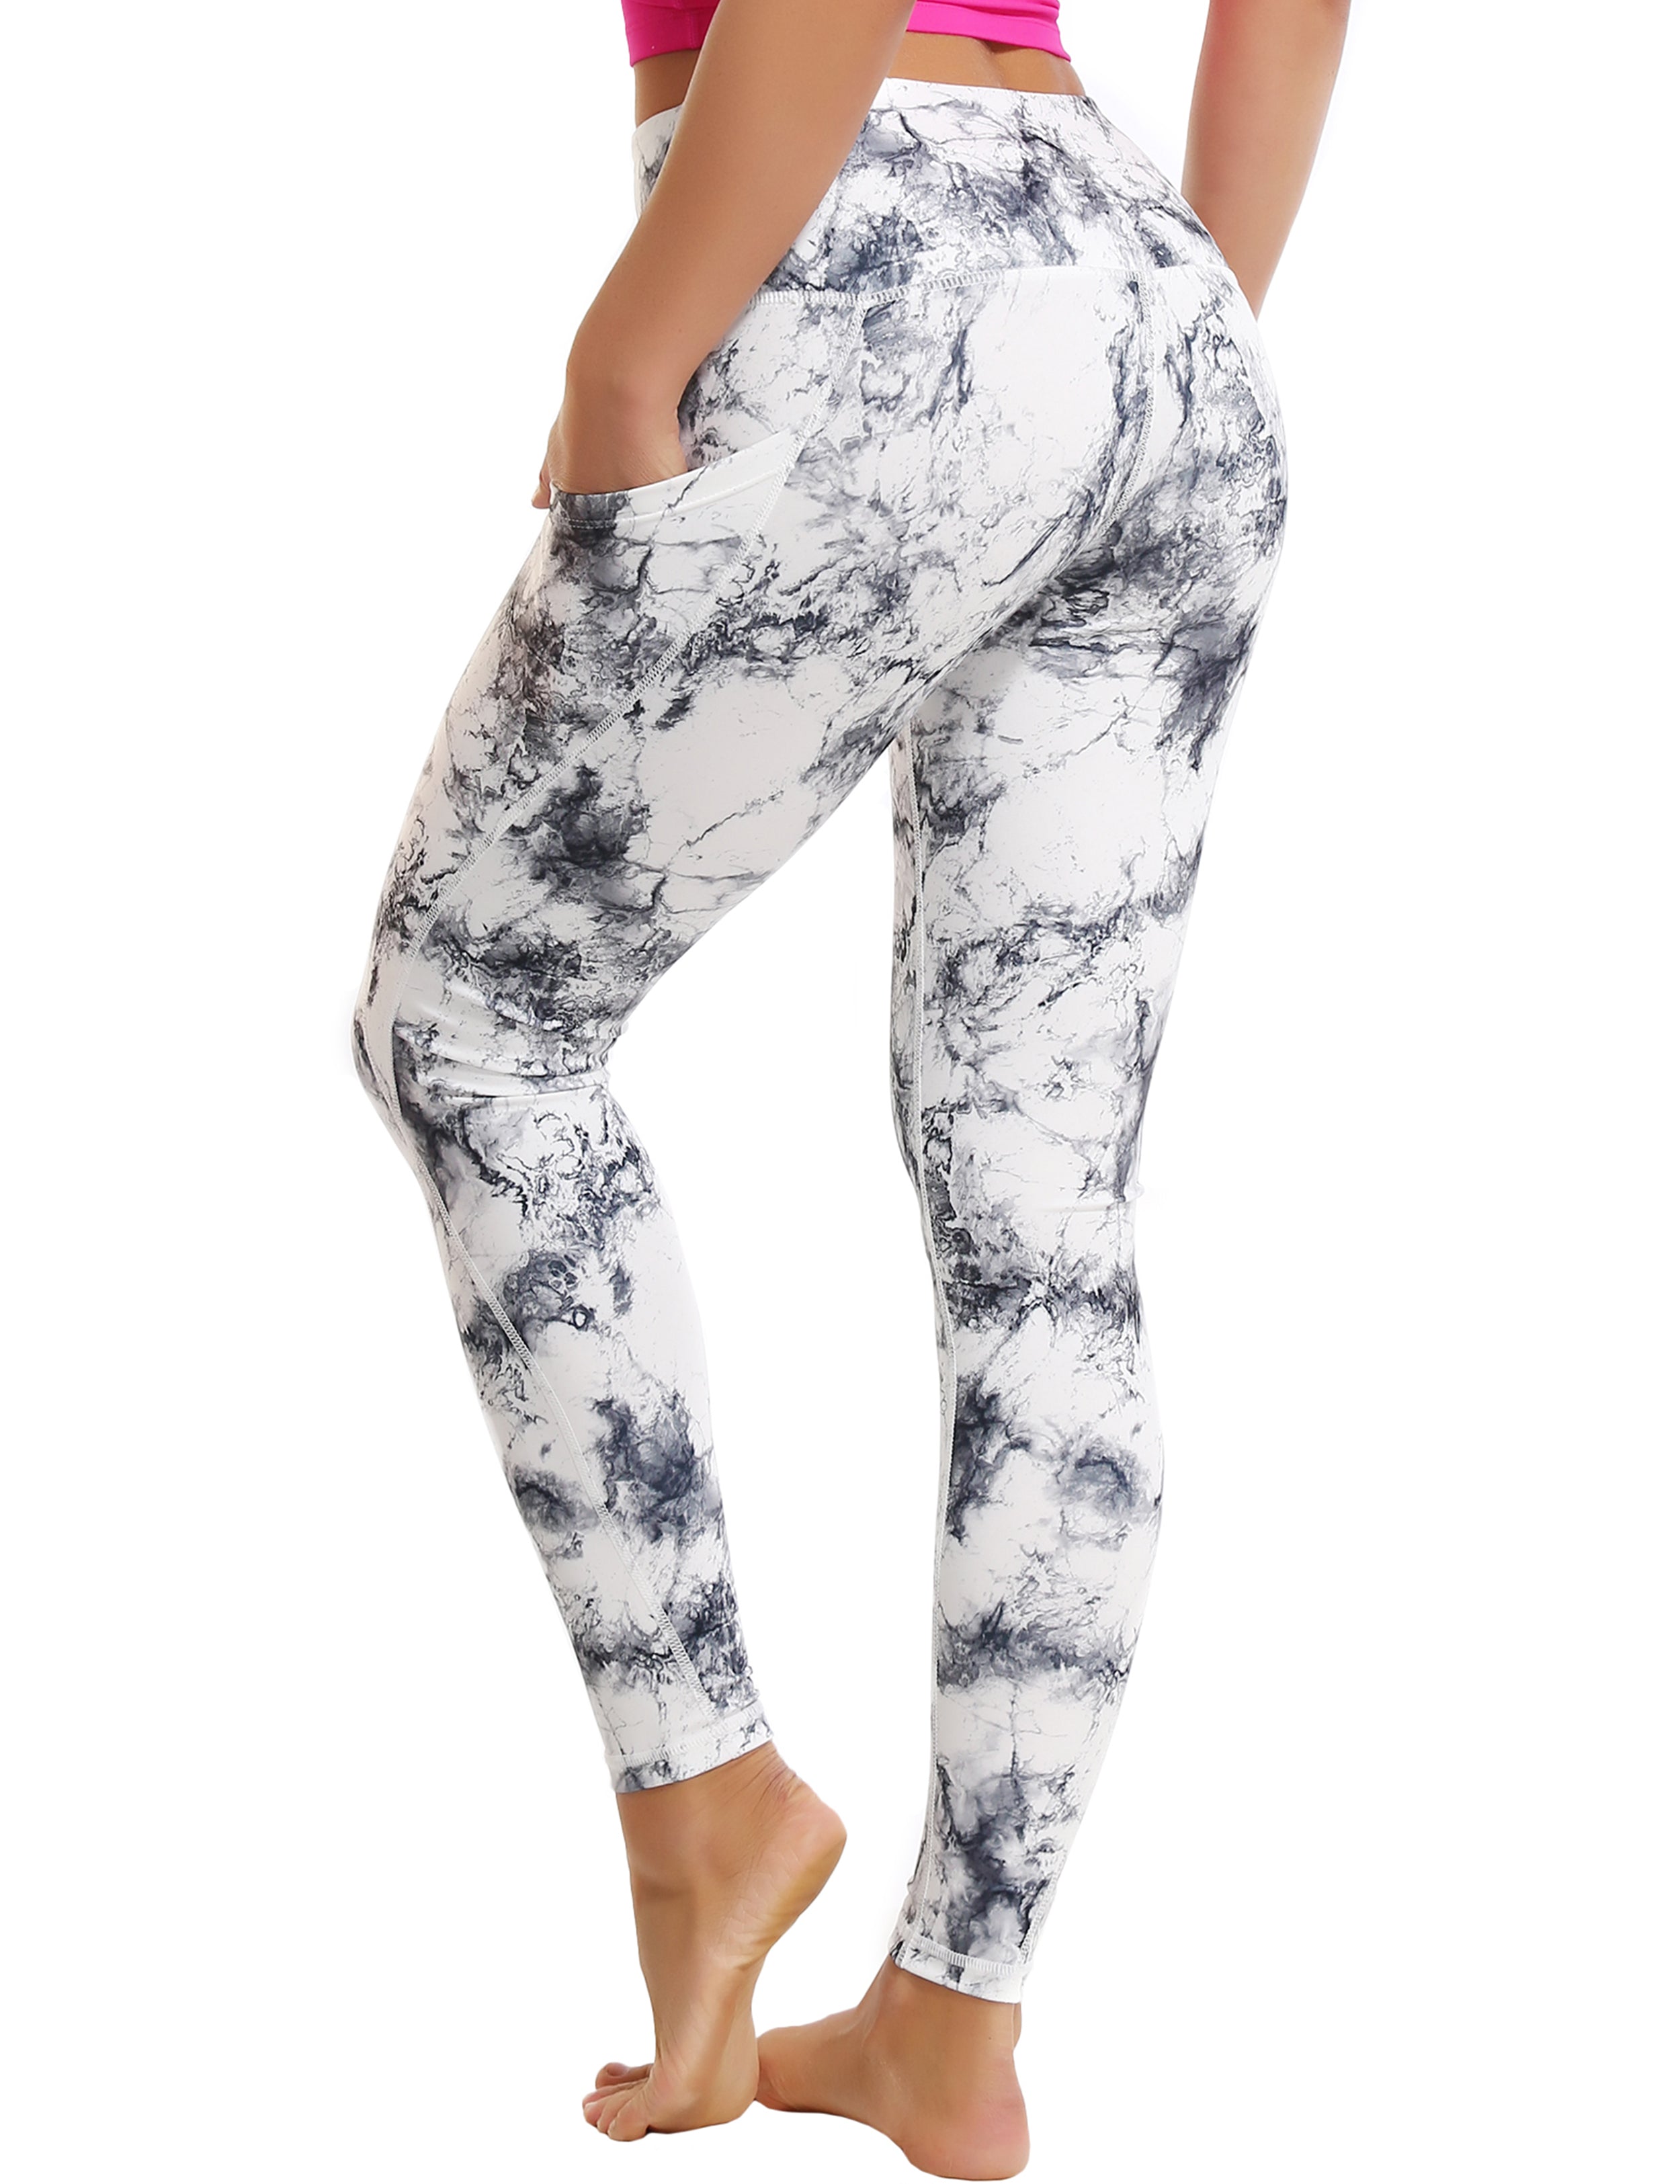 High Waist Side Pockets Biking Pants arabescato 78%Polyester/22%Spandex Fabric doesn't attract lint easily 4-way stretch No see-through Moisture-wicking Tummy control Inner pocket